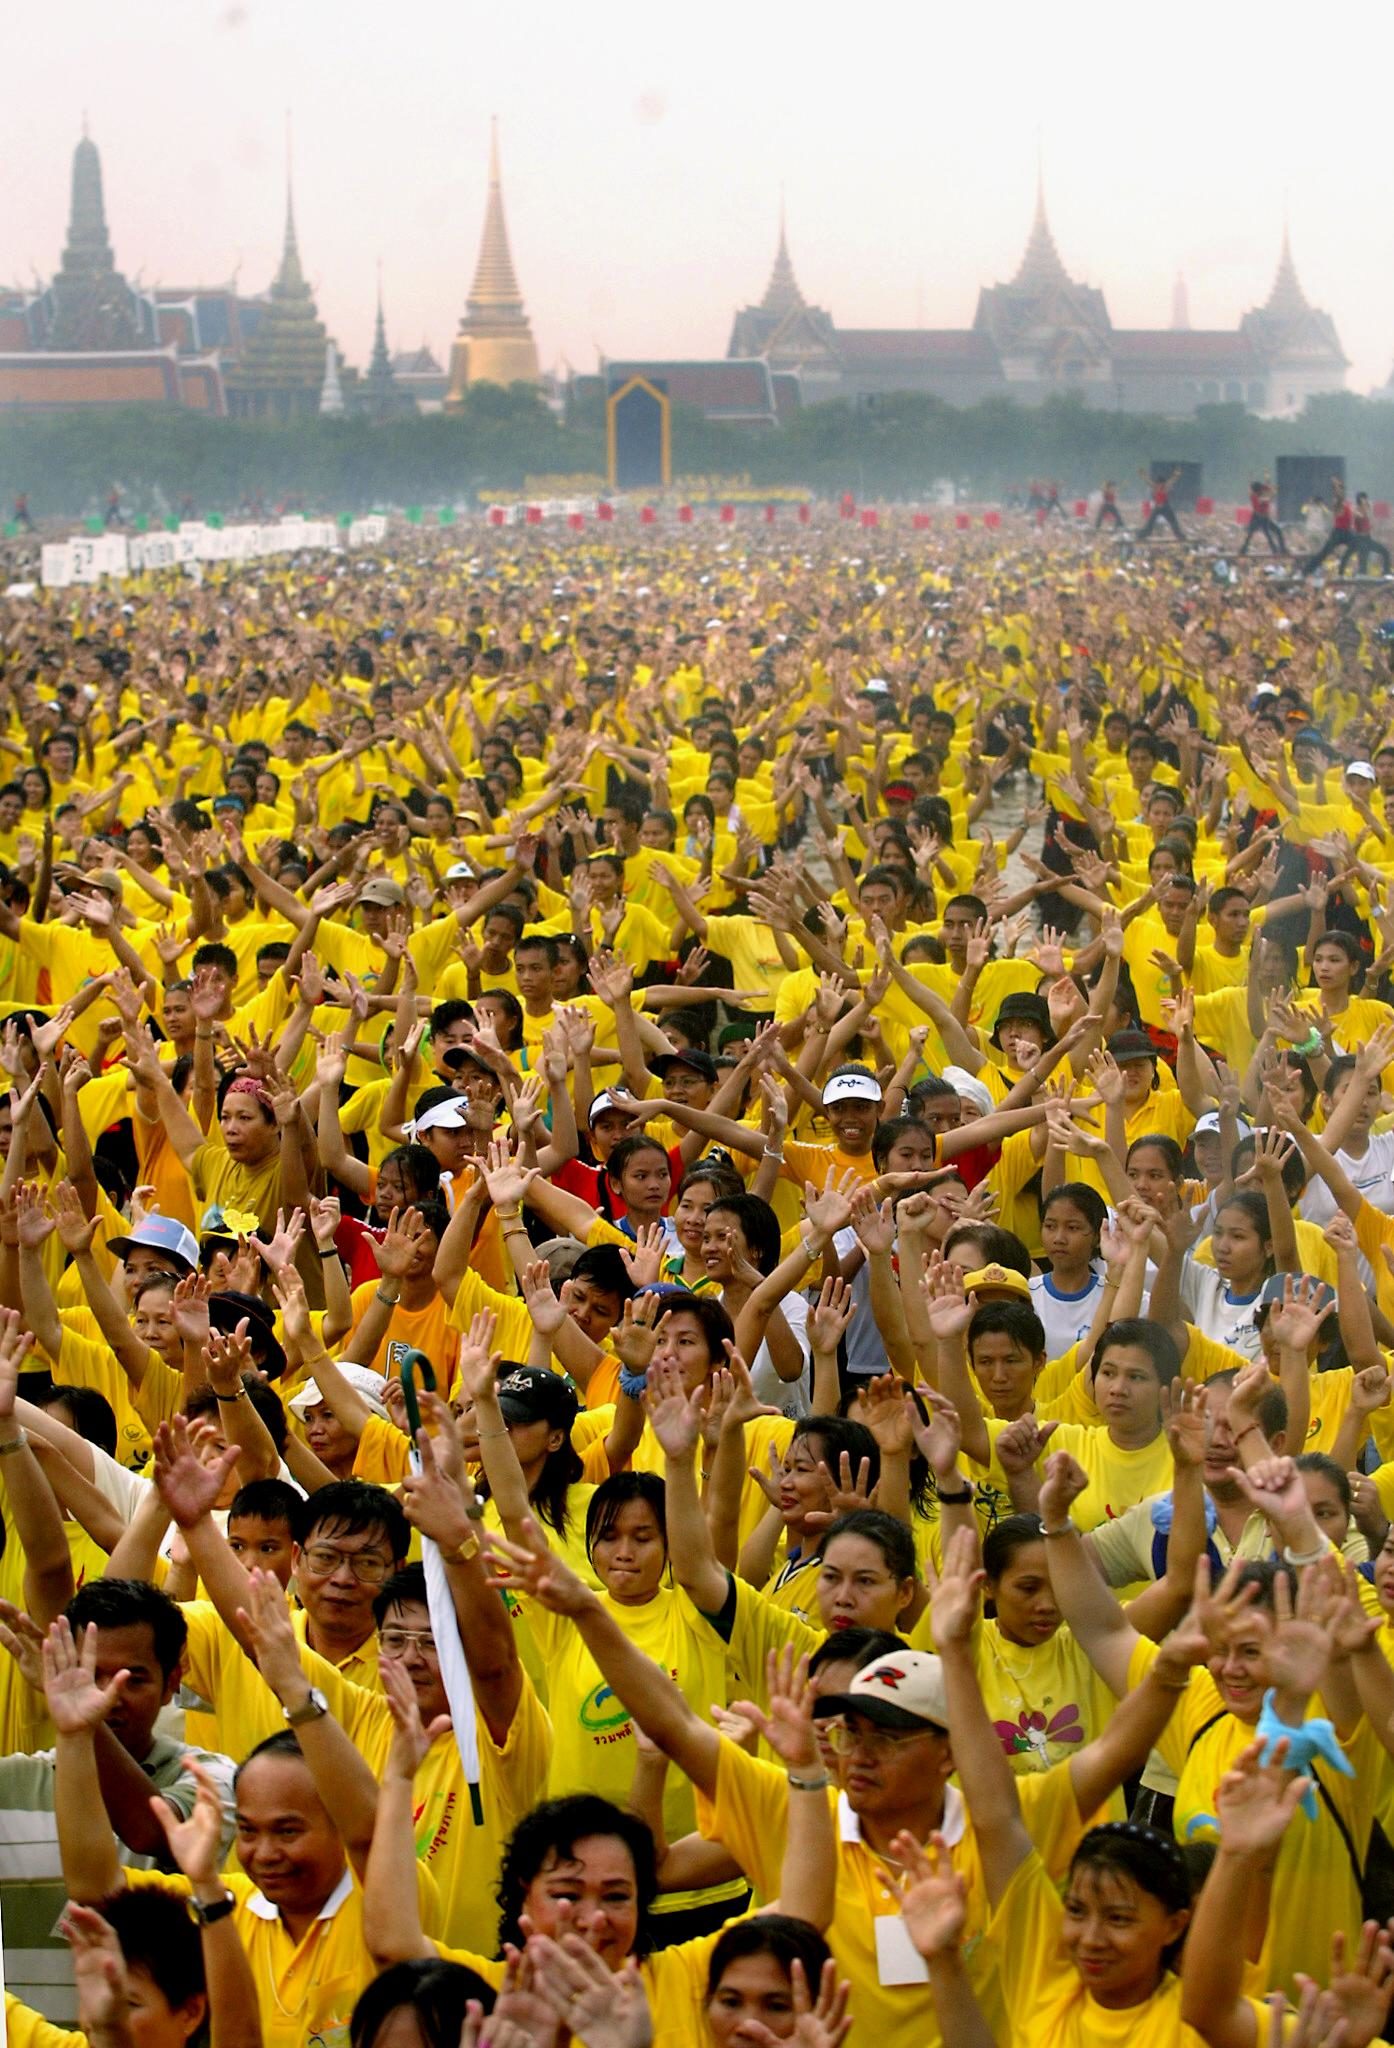 A massive crowd participates in an aerobics session near the Royal Palace 23 November 2002 as part of a global movement for health aimed at being the world's largest health festival and led by Thailand's Prime Minister Thaksin Shinawatra. The massive outdoor aerobics exercise session led by Thaksin and involving more than 50,000 people aims to break the world record. The event joins yearlong national efforts around the world to take further this year's World Health Day theme, "Move for Health". AFP PHOTO/Stephen SHAVER / AFP PHOTO / STEPHEN SHAVER